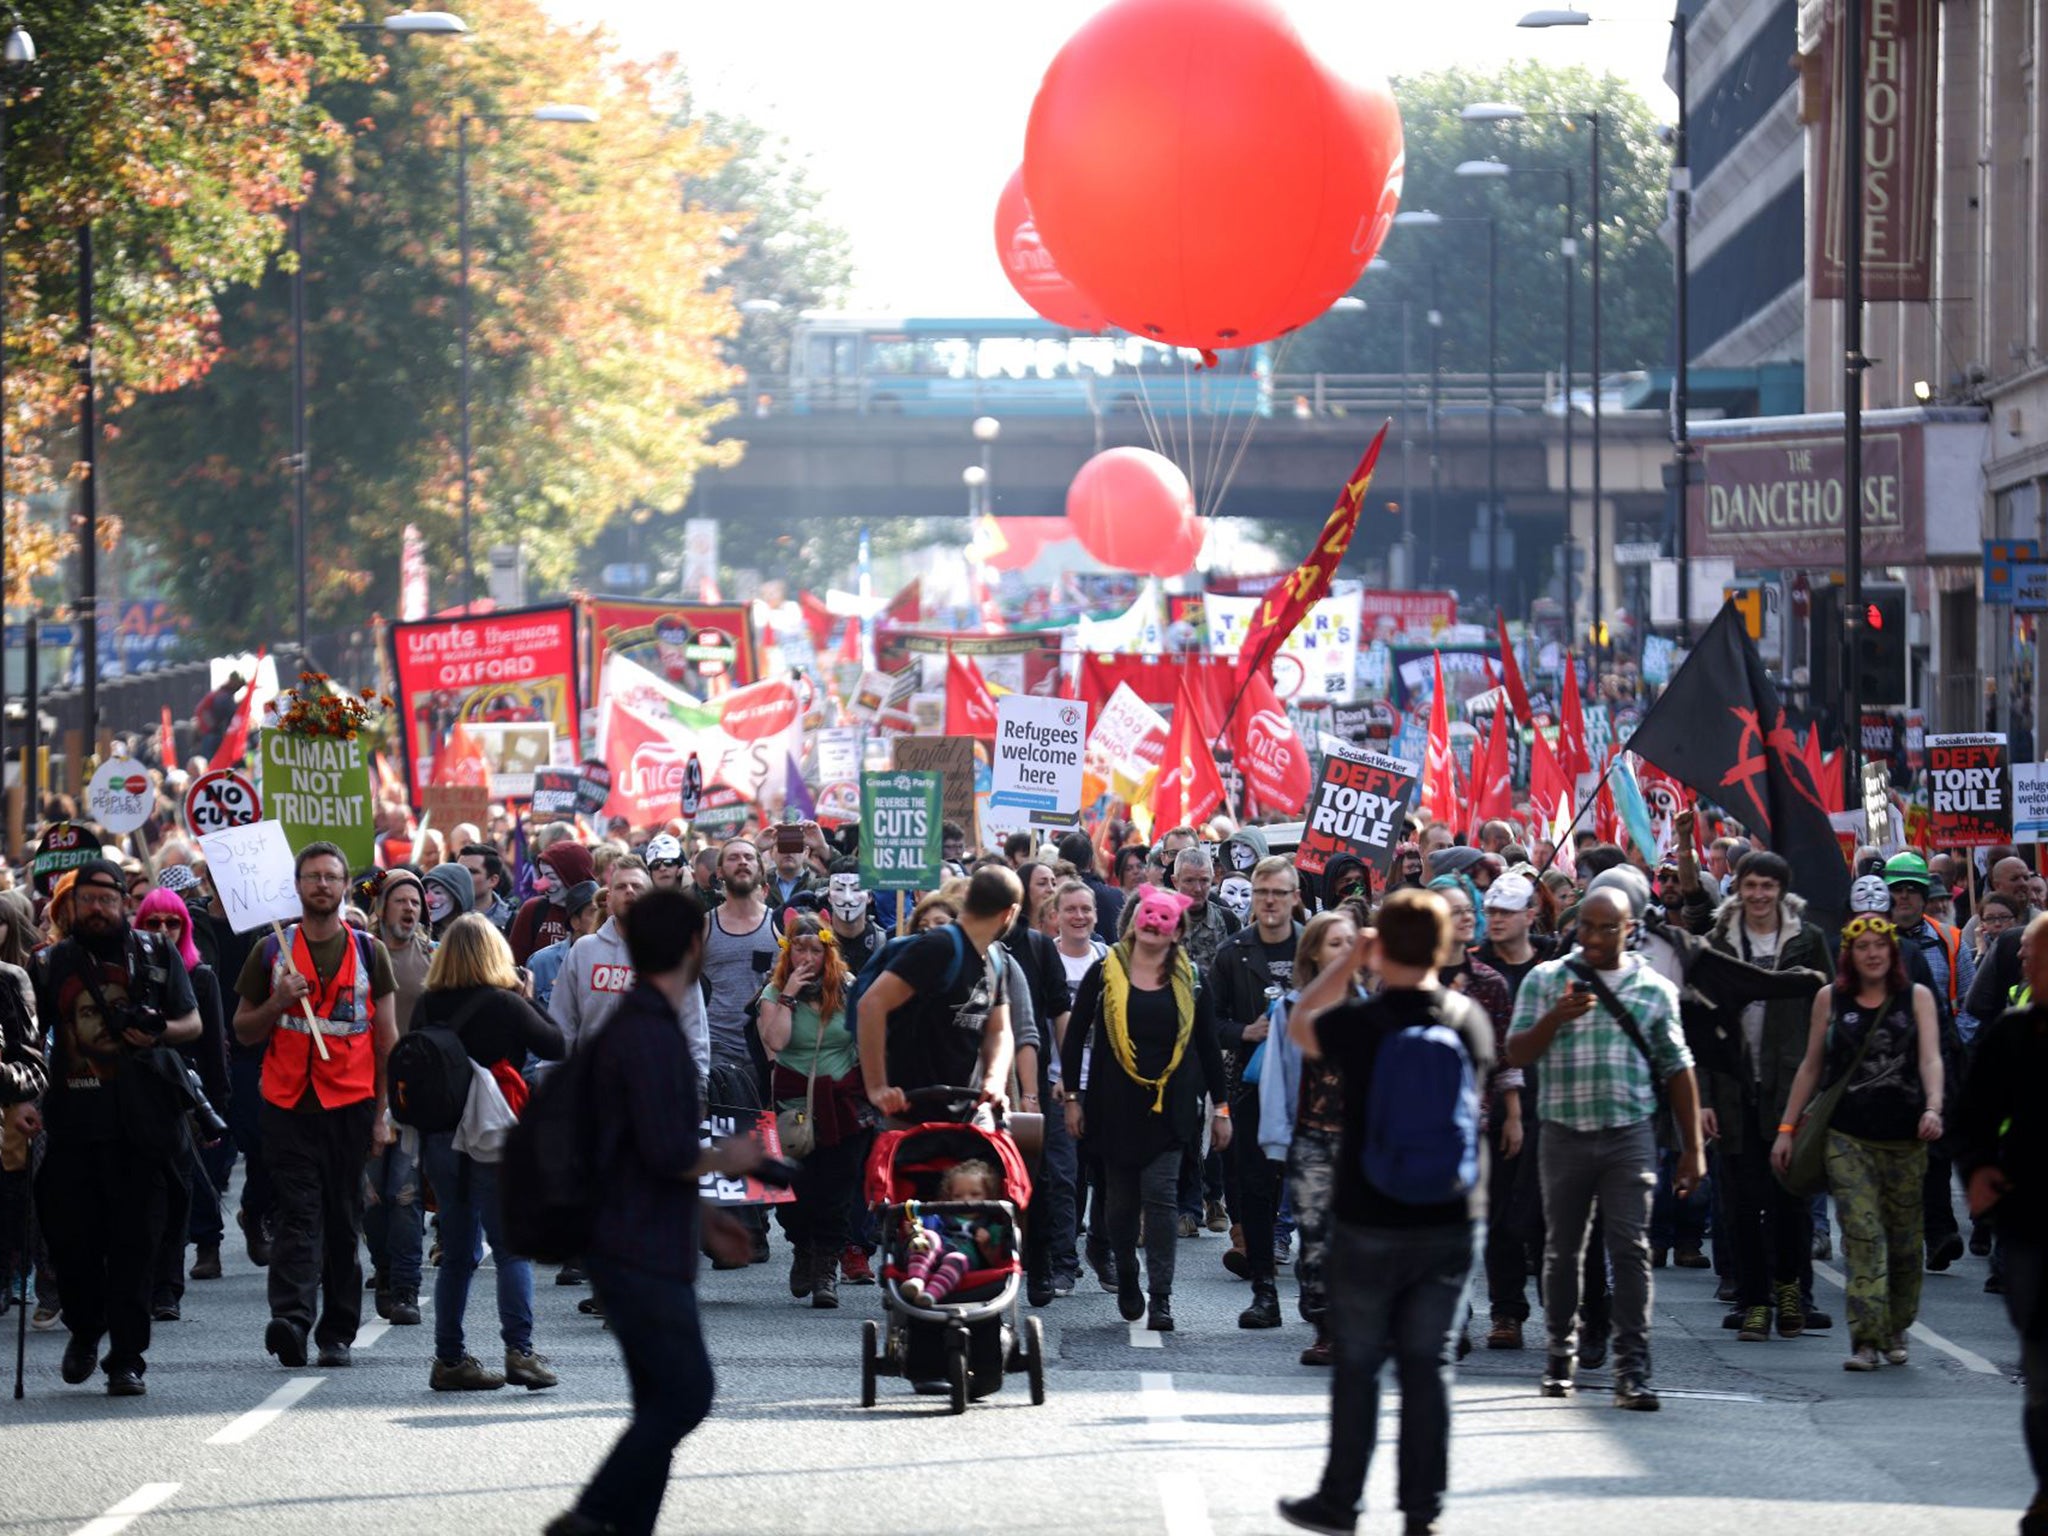 People take part in an anti-austerity protest during the first day of the Conservative Party Autumn Conference 2015 on October 4